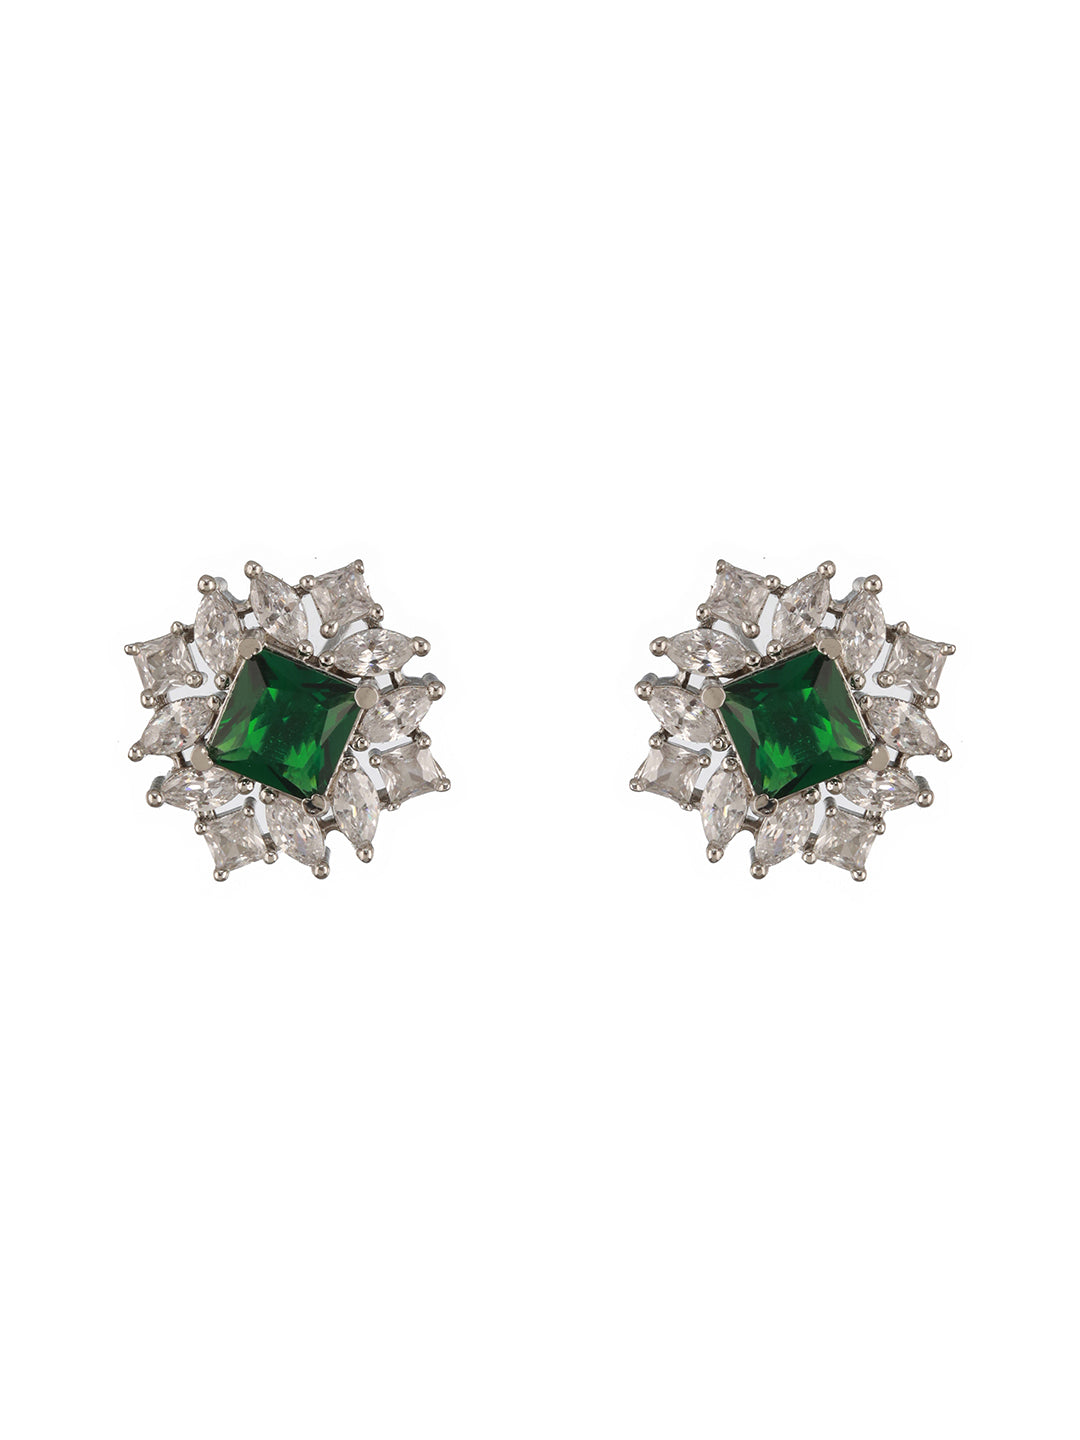 Jazz And Sizzle Silver-Toned & Green Cubic Zirconia-Studded Classic Studs Earrings - Jazzandsizzle